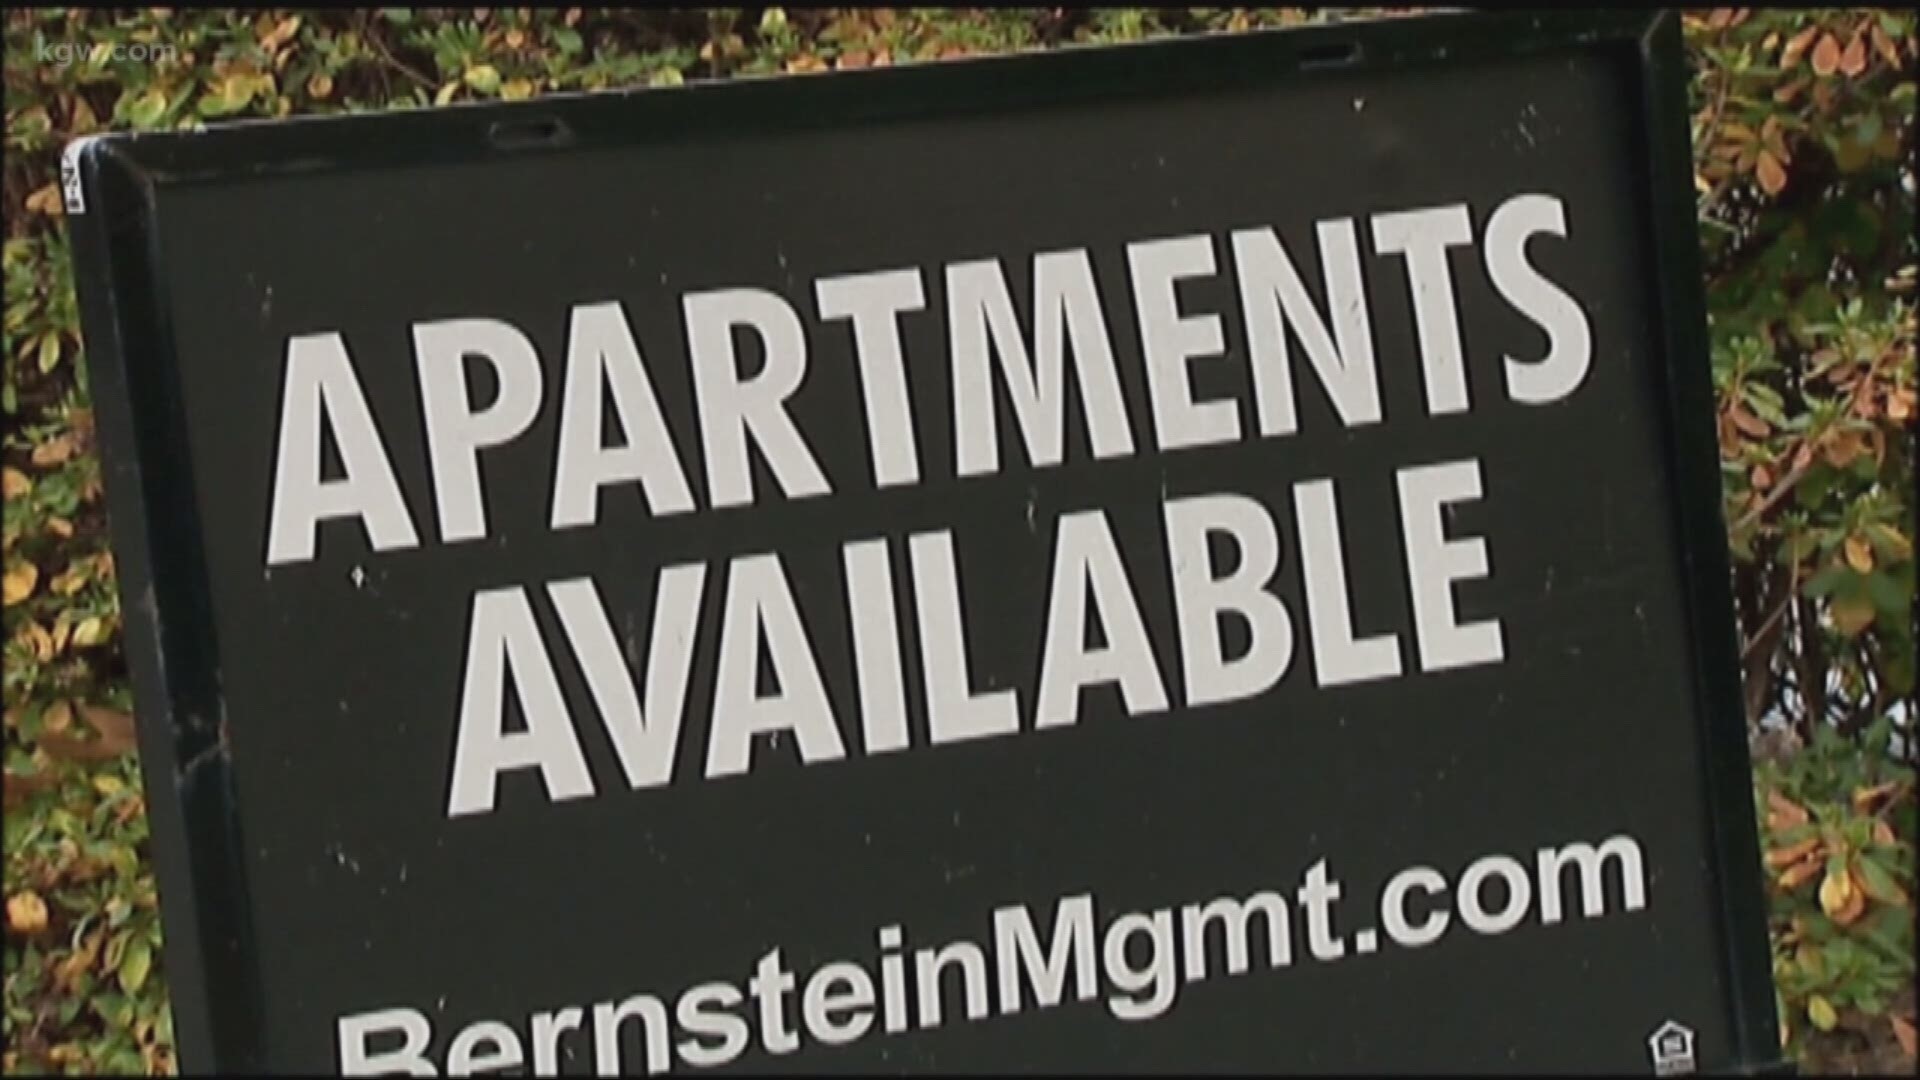 Portland’s renter protection ordinance is moving forward.